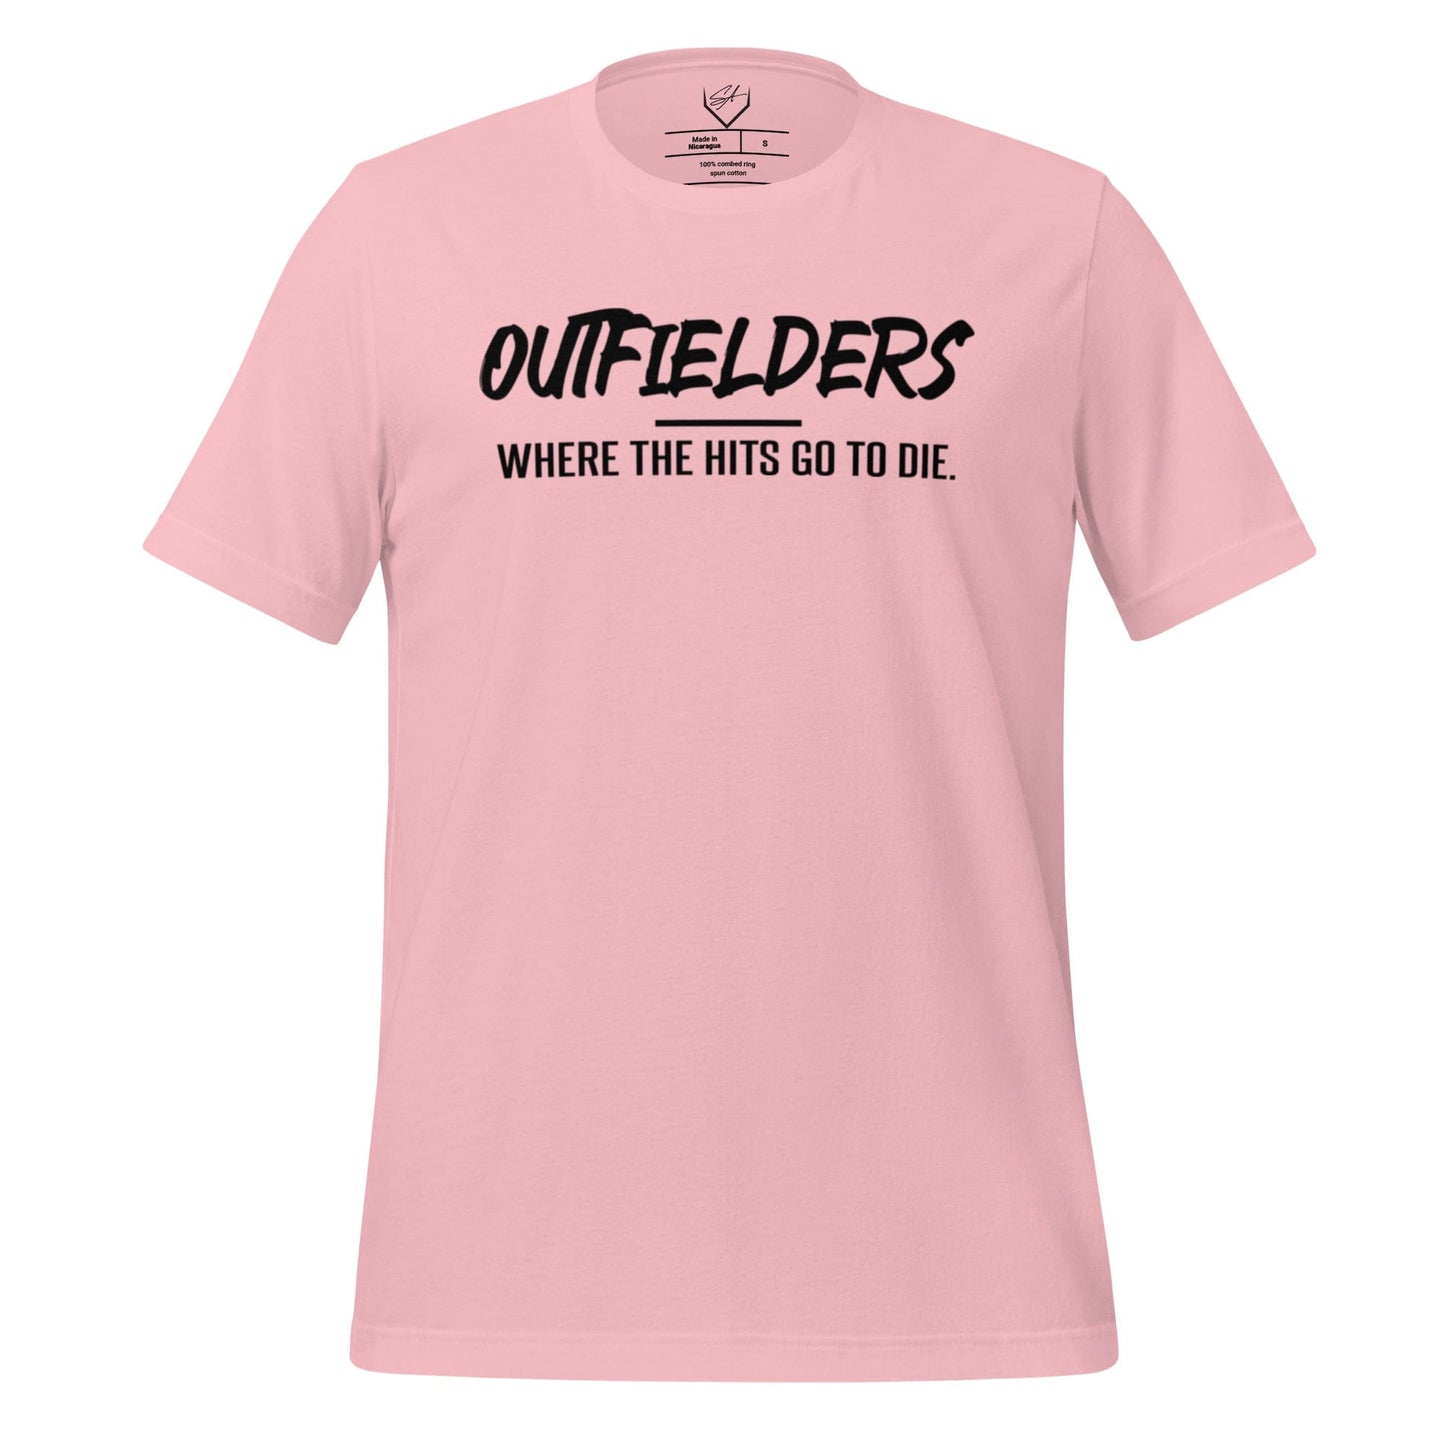 Outfielders: Where The Hits Go To Die - Adult Tee